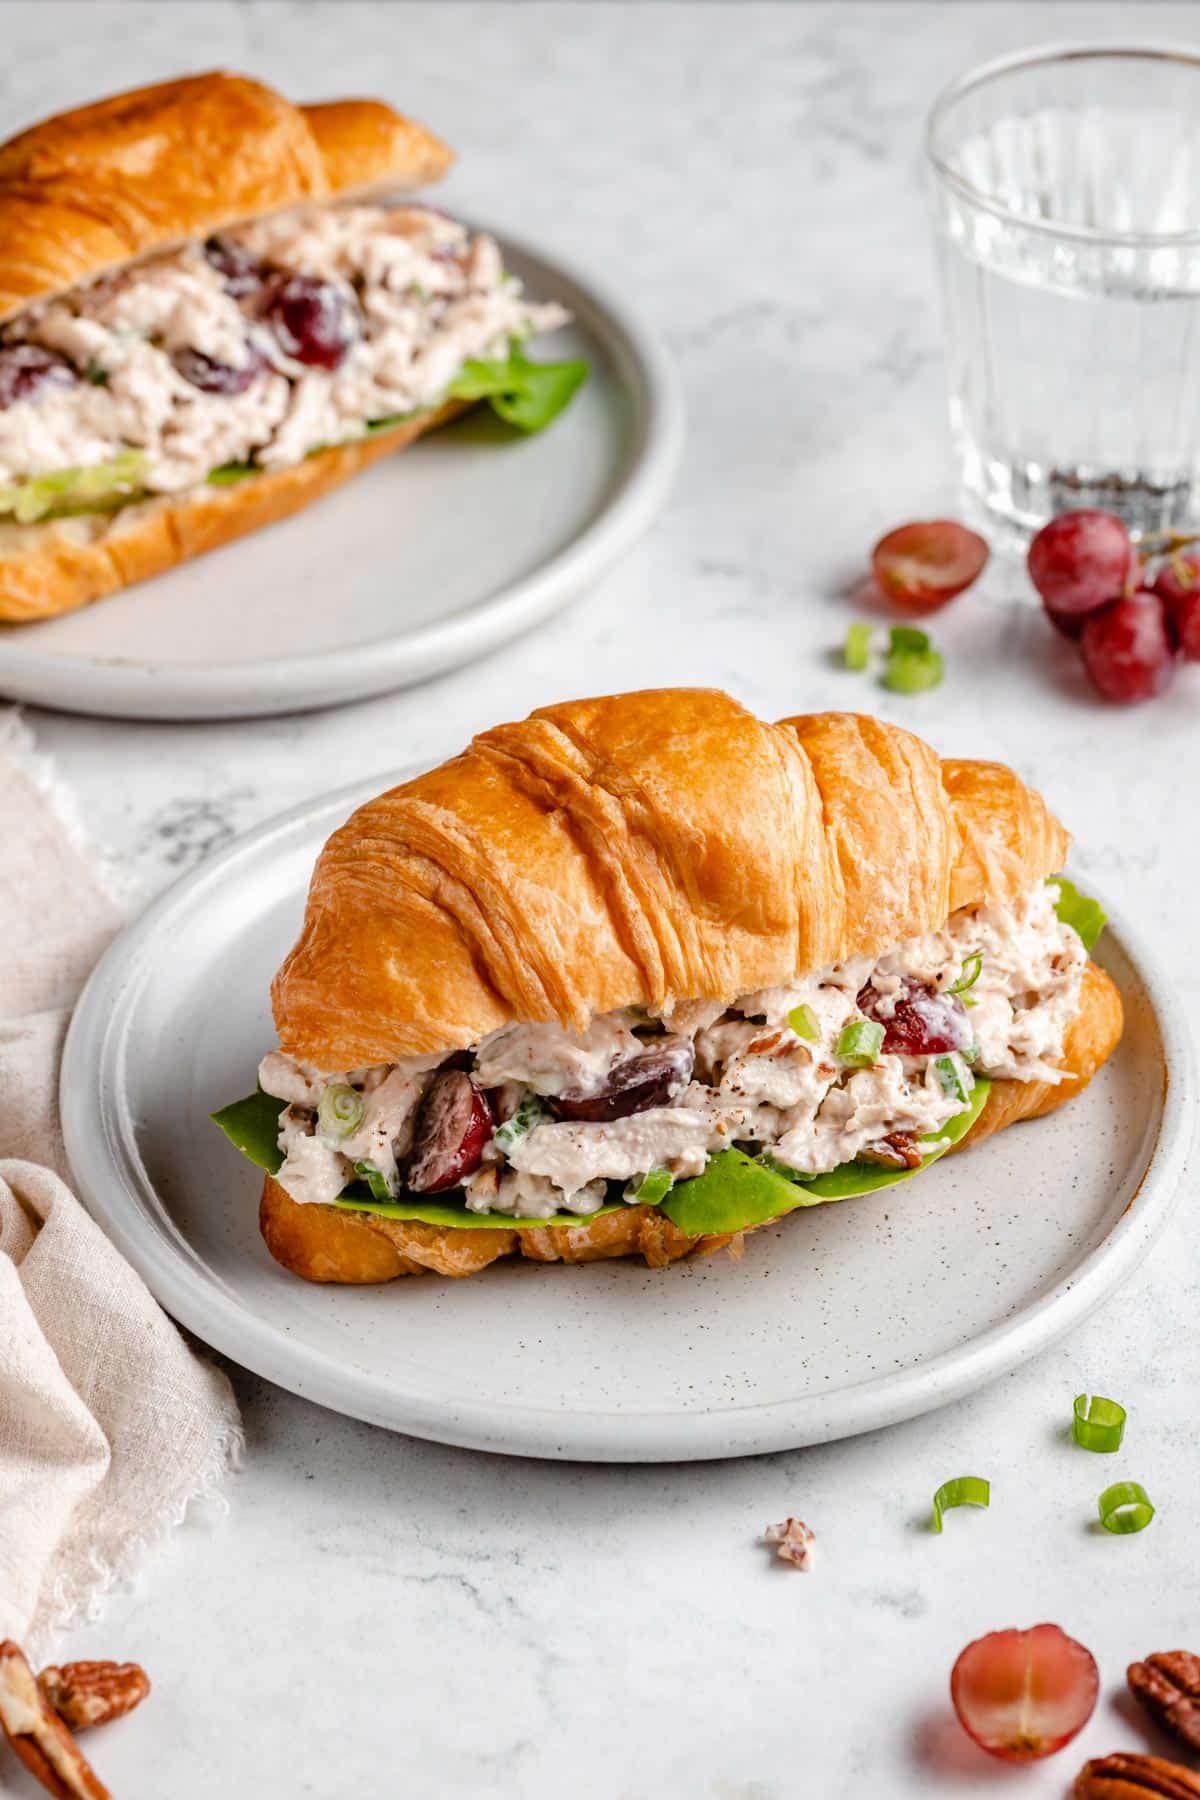 https://www.kimscravings.com/wp-content/uploads/2019/10/Chicken-Salad-with-Grapes-5.jpg